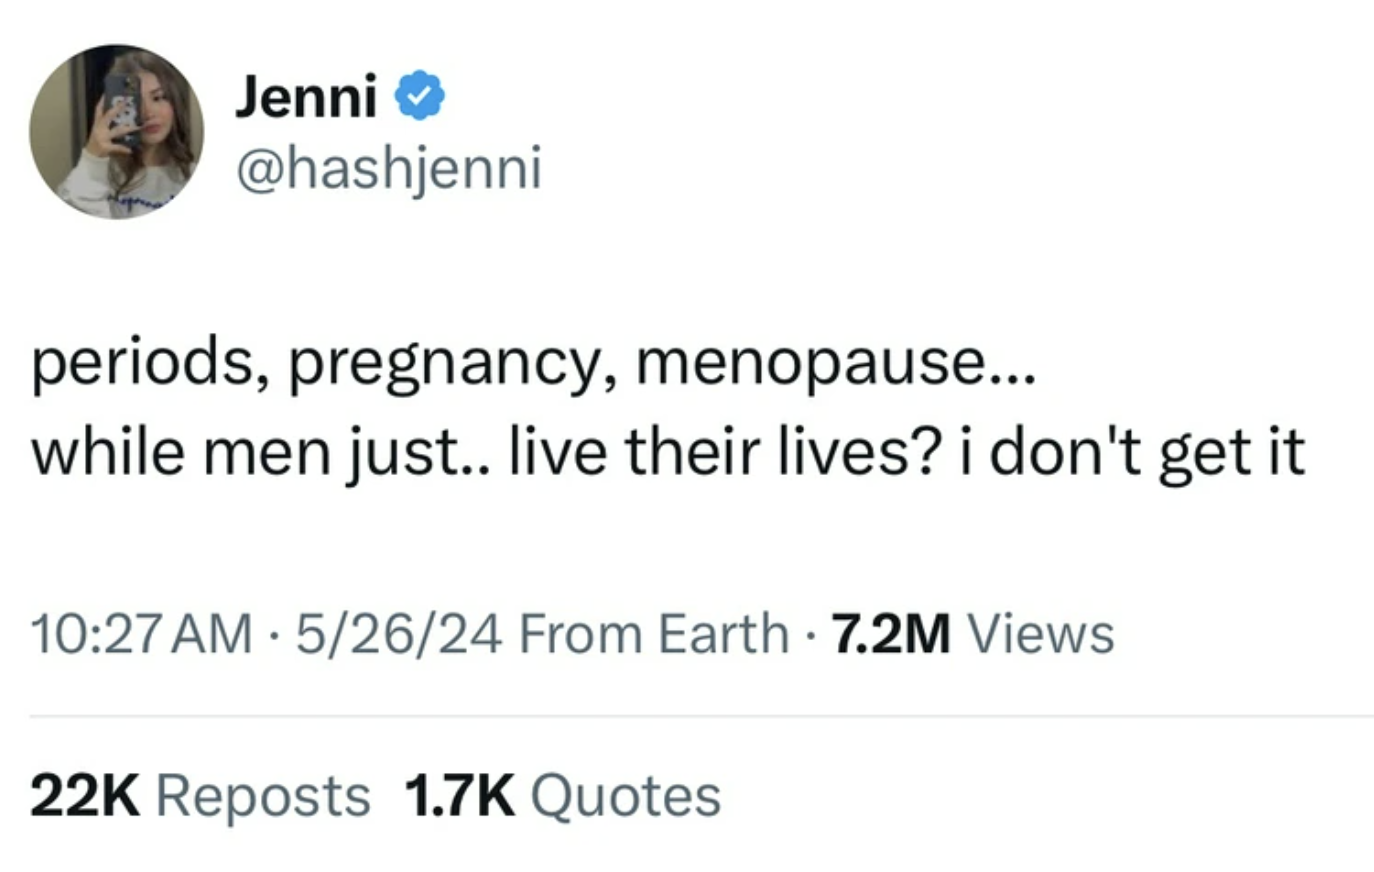 screenshot - Jenni periods, pregnancy, menopause... while men just.. live their lives? i don't get it 52624 From Earth 7.2M Views 22K Reposts Quotes